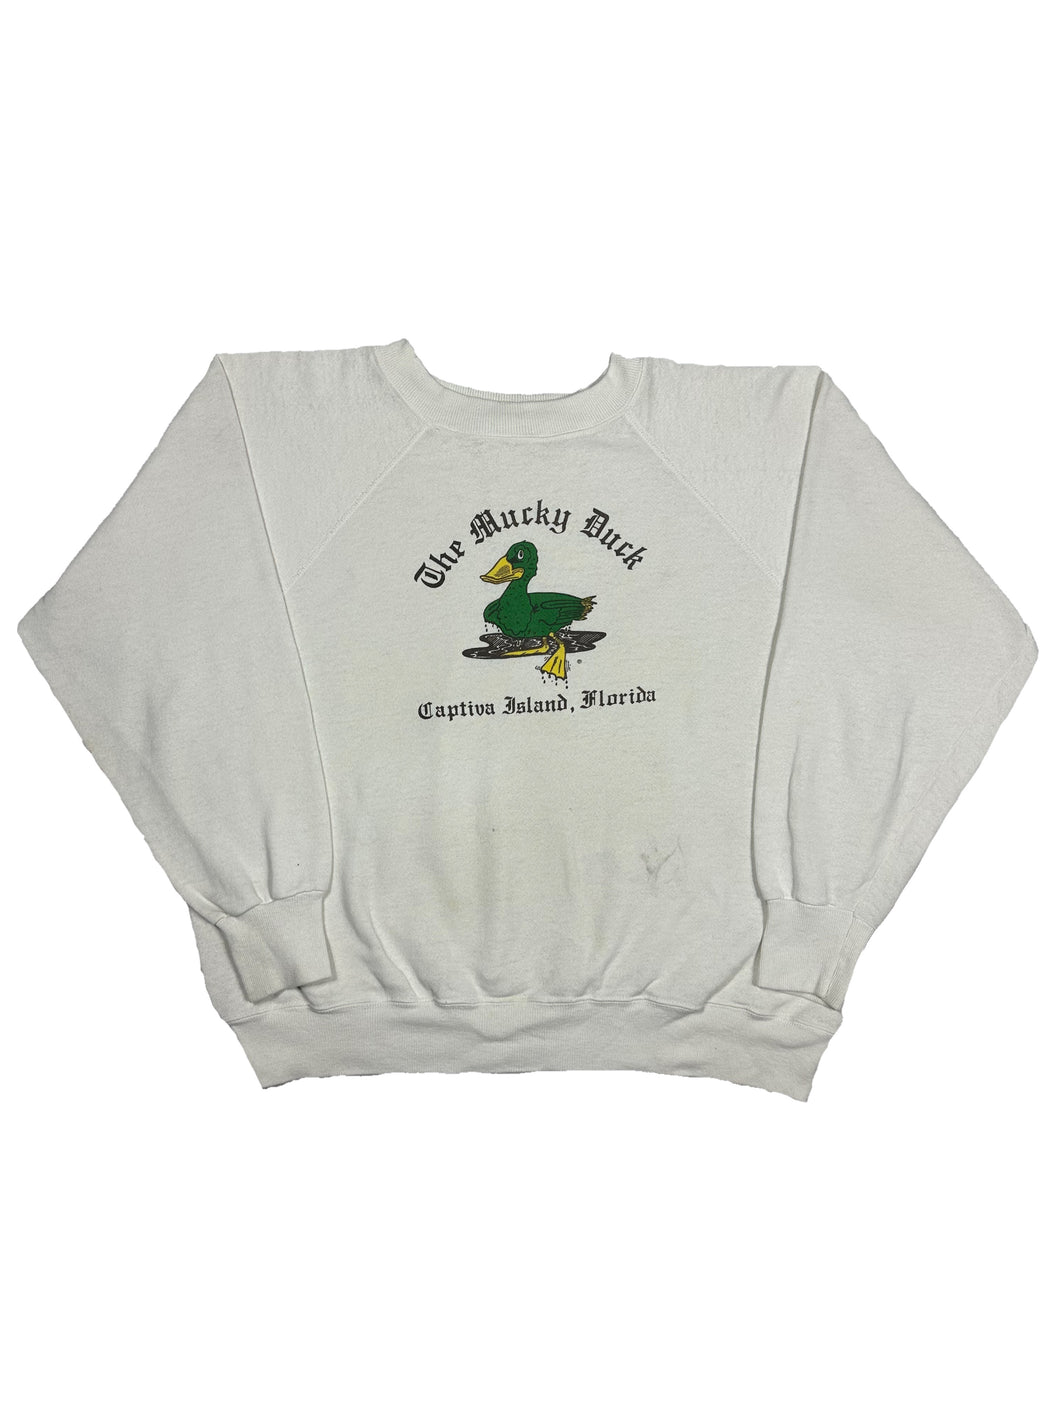 VINTAGE MUCKY DUCK CREWNECK SIZE SMALL